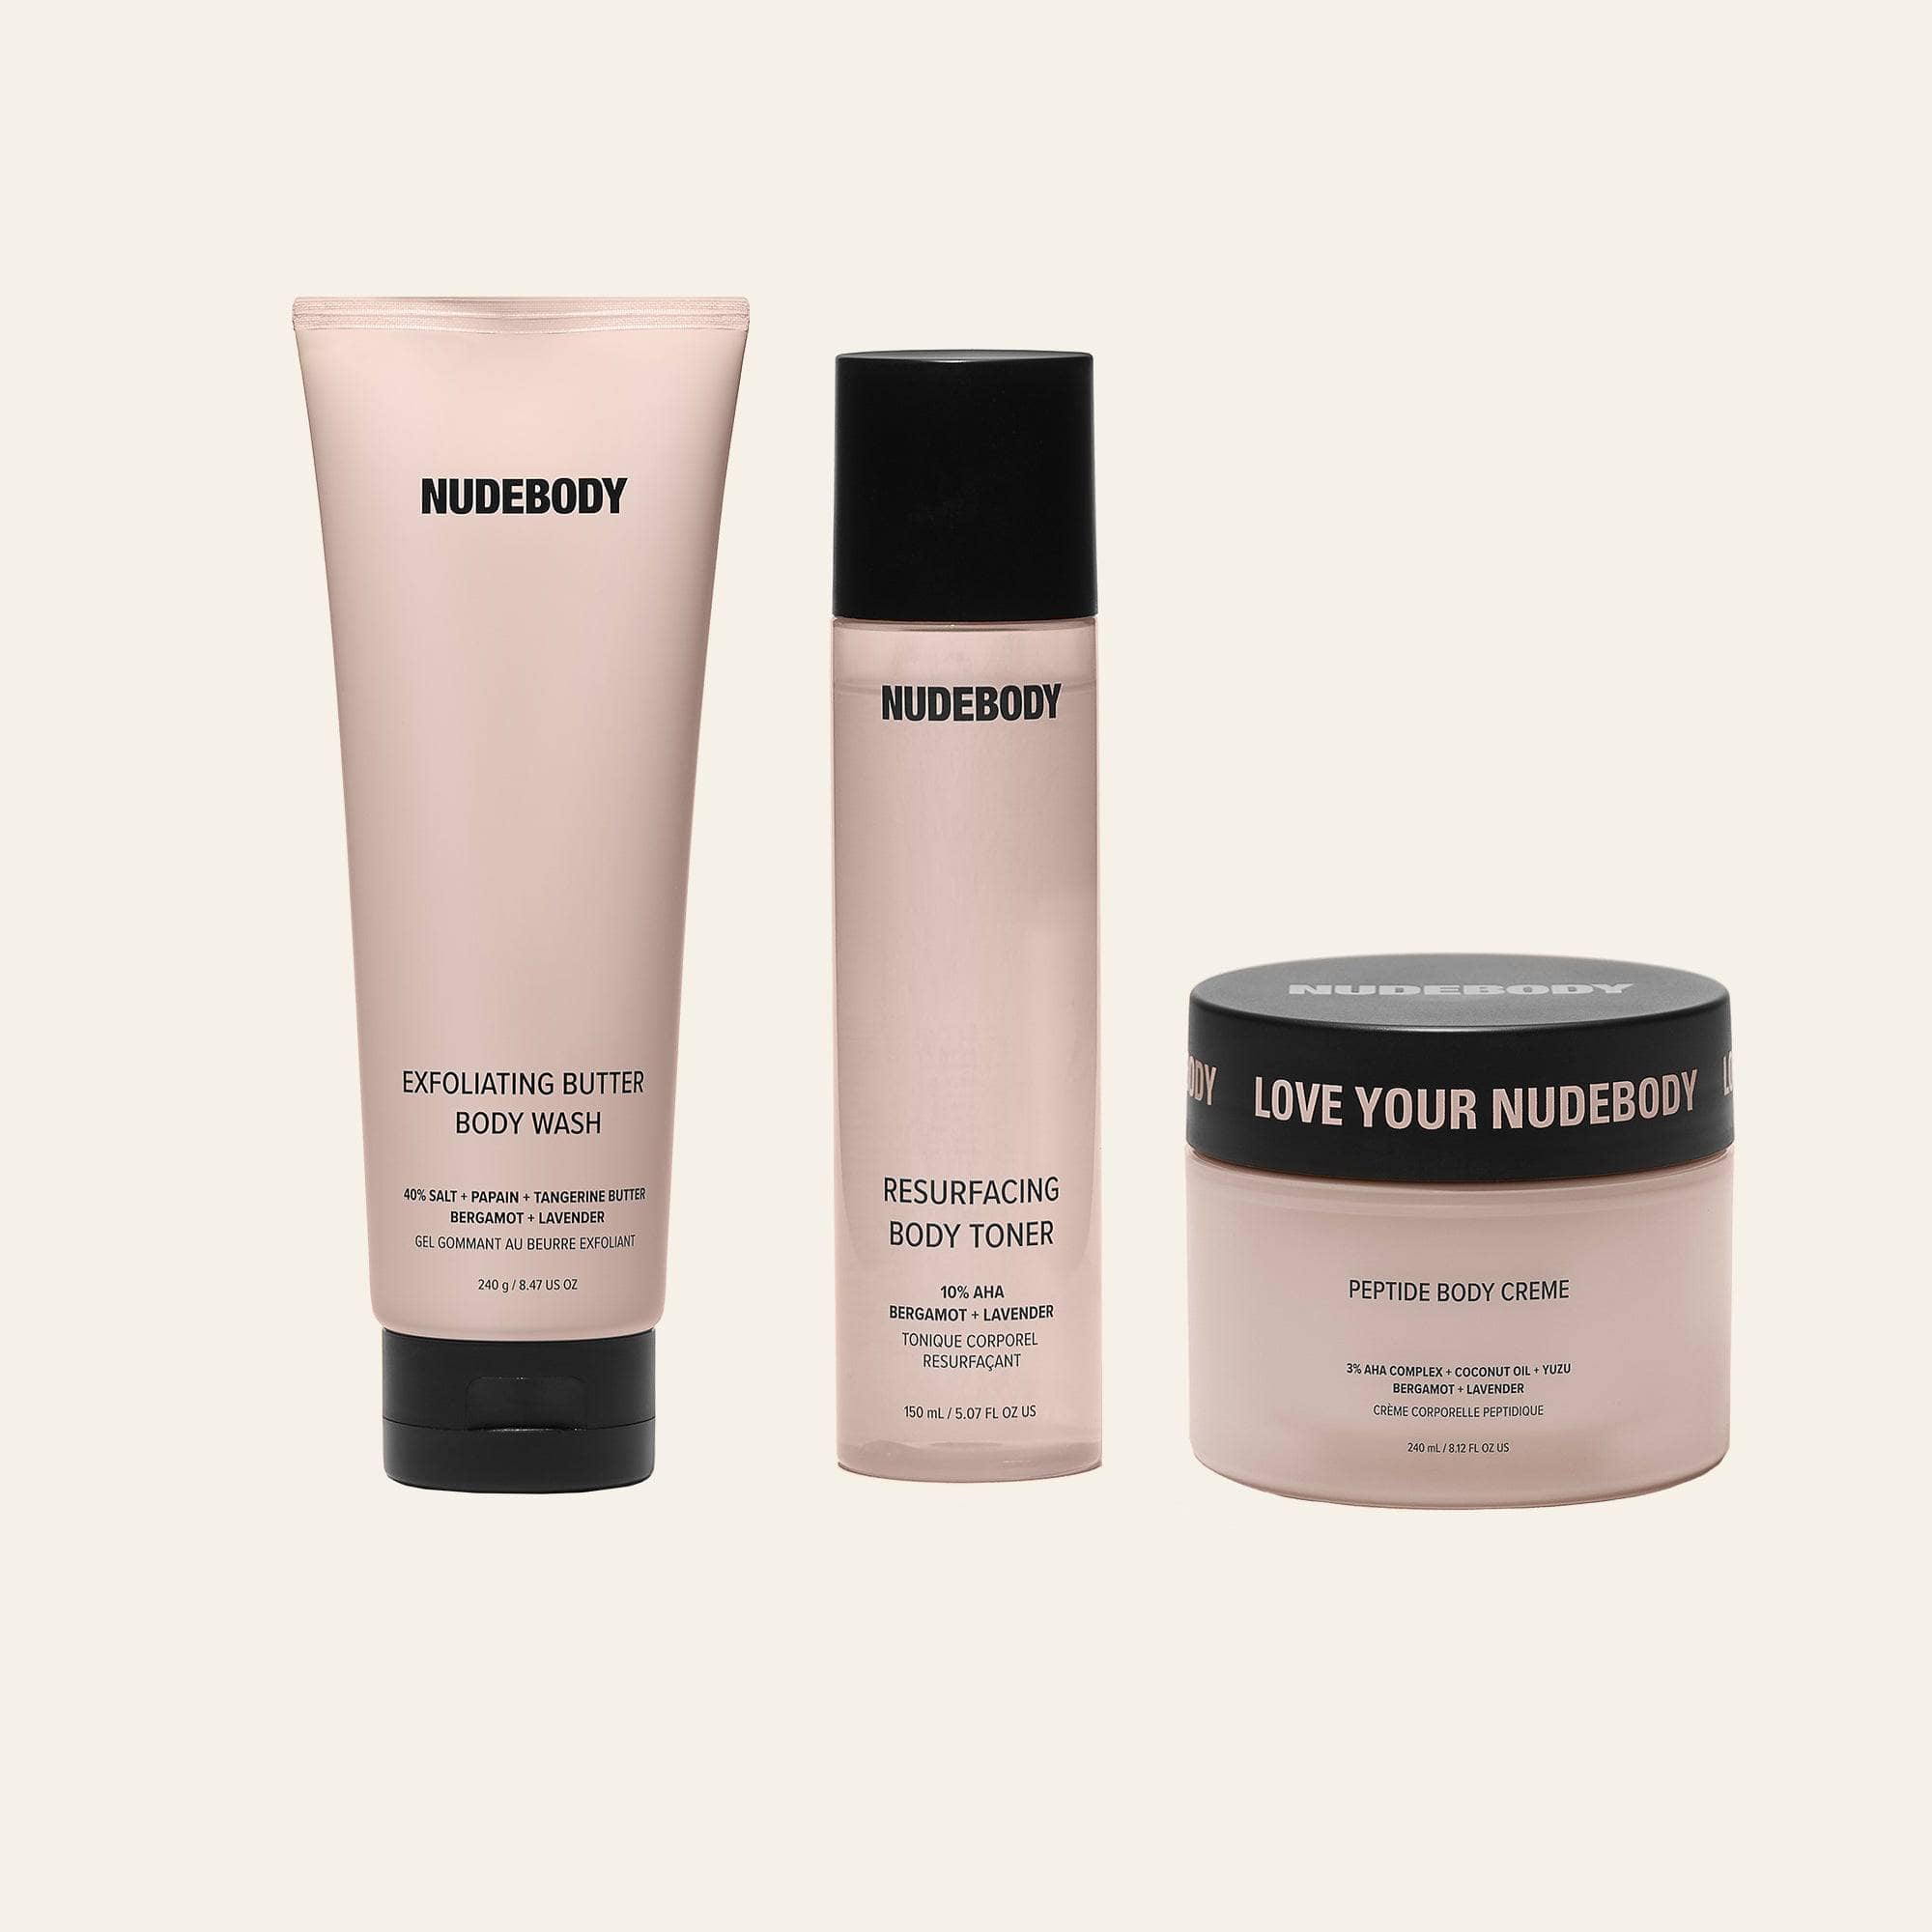 NUDEBODY 3pc Kit Includes Free Cosmetic Case